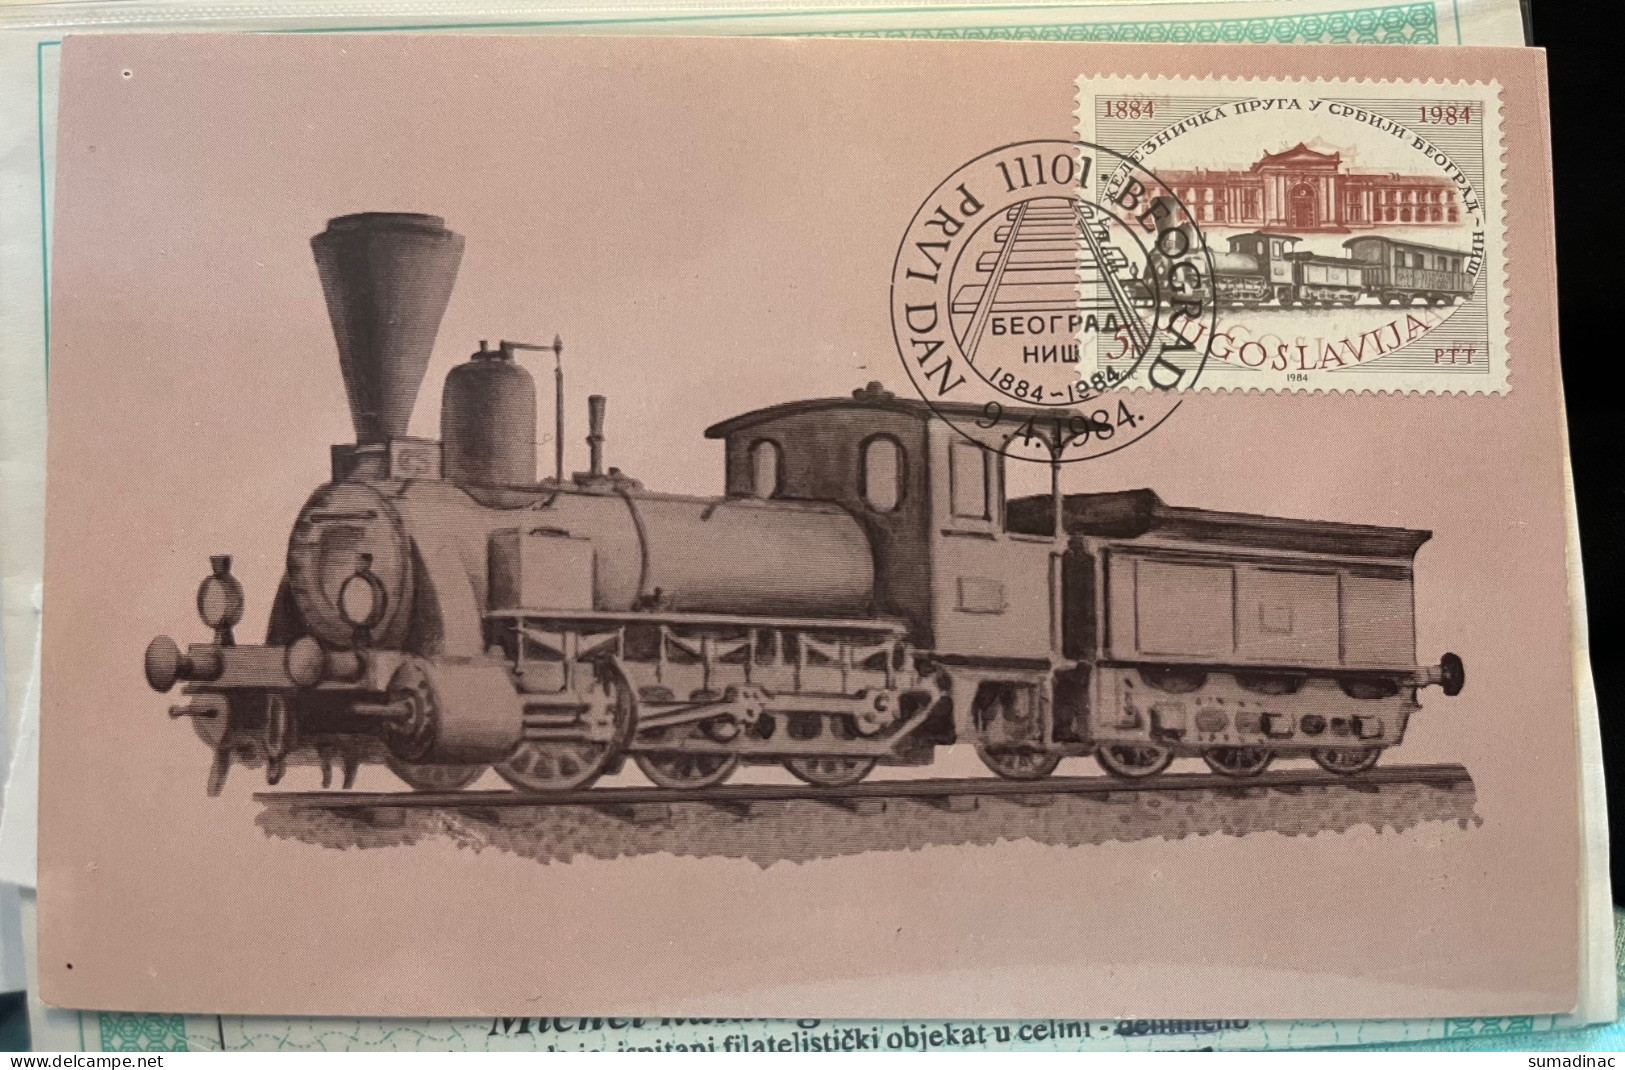 Yugoslavia Maxi Card With Double Print On A Stamp, Train, Railway, Certificate A. Krstić - Imperforates, Proofs & Errors